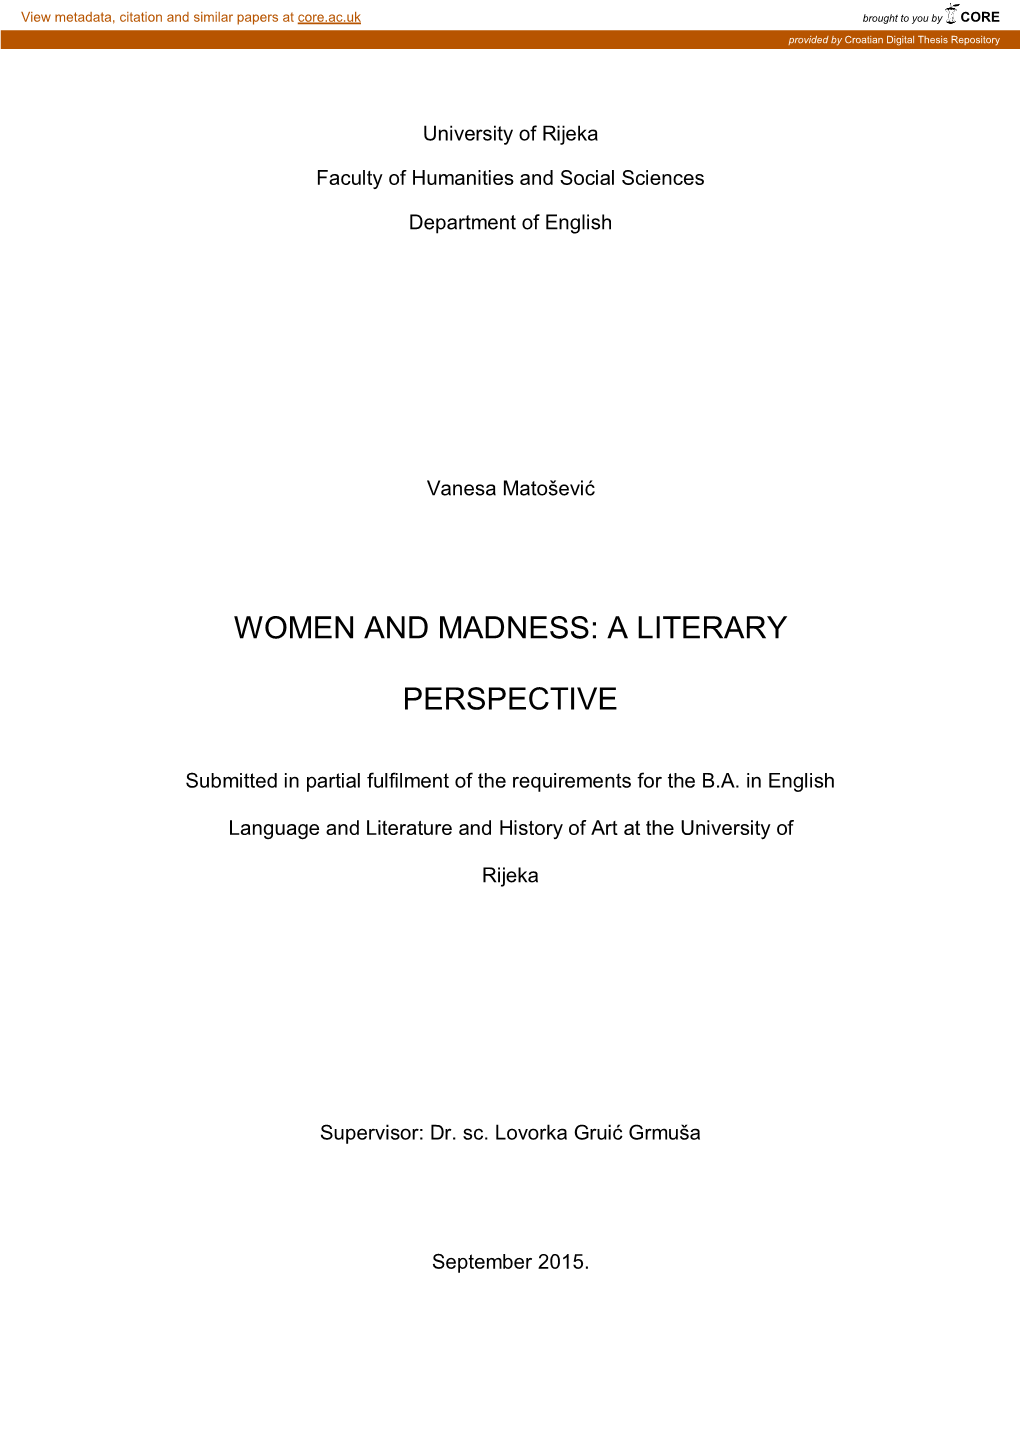 Women and Madness: a Literary